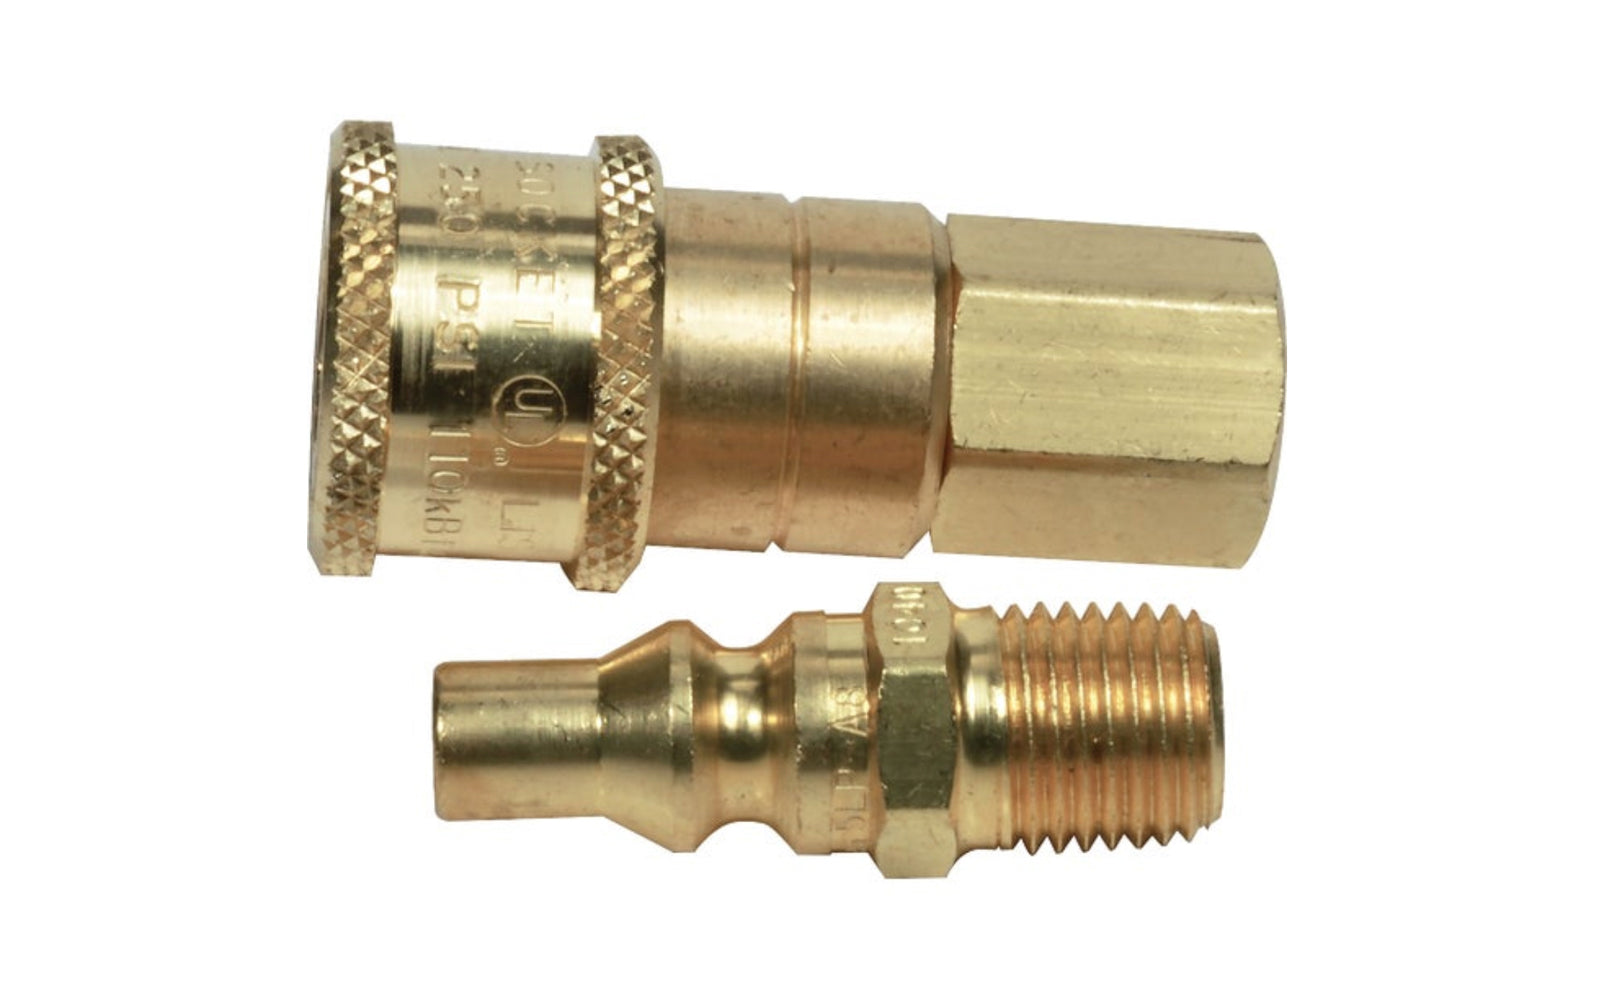 Mr Heater Propane/ Natural Gas Connector Kit. 1/4 In. propane or natural gas quick connector and excess flow plug. 1/4 In. Male pipe thread x 1/4 In. Female pipe thread CSA (AGA) certified, UL approved. Used with Model No. F276134, F276139, and F276140.